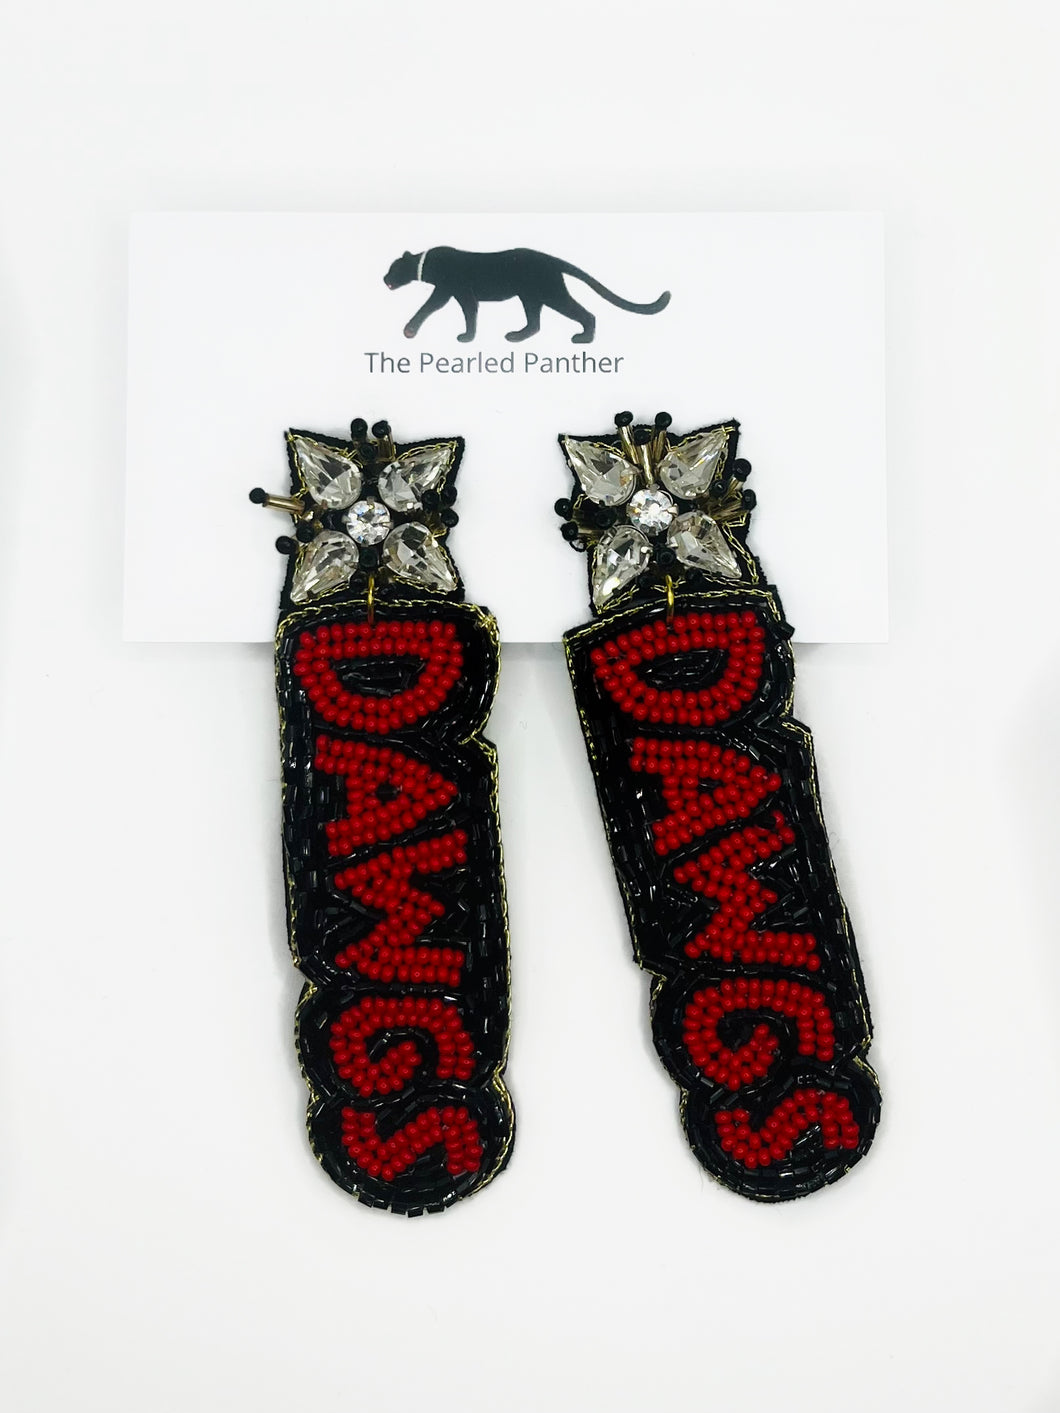 Georgia UGA DAWGS Red and Black Beaded Statement Earrings/ game day/ tailgate fashion